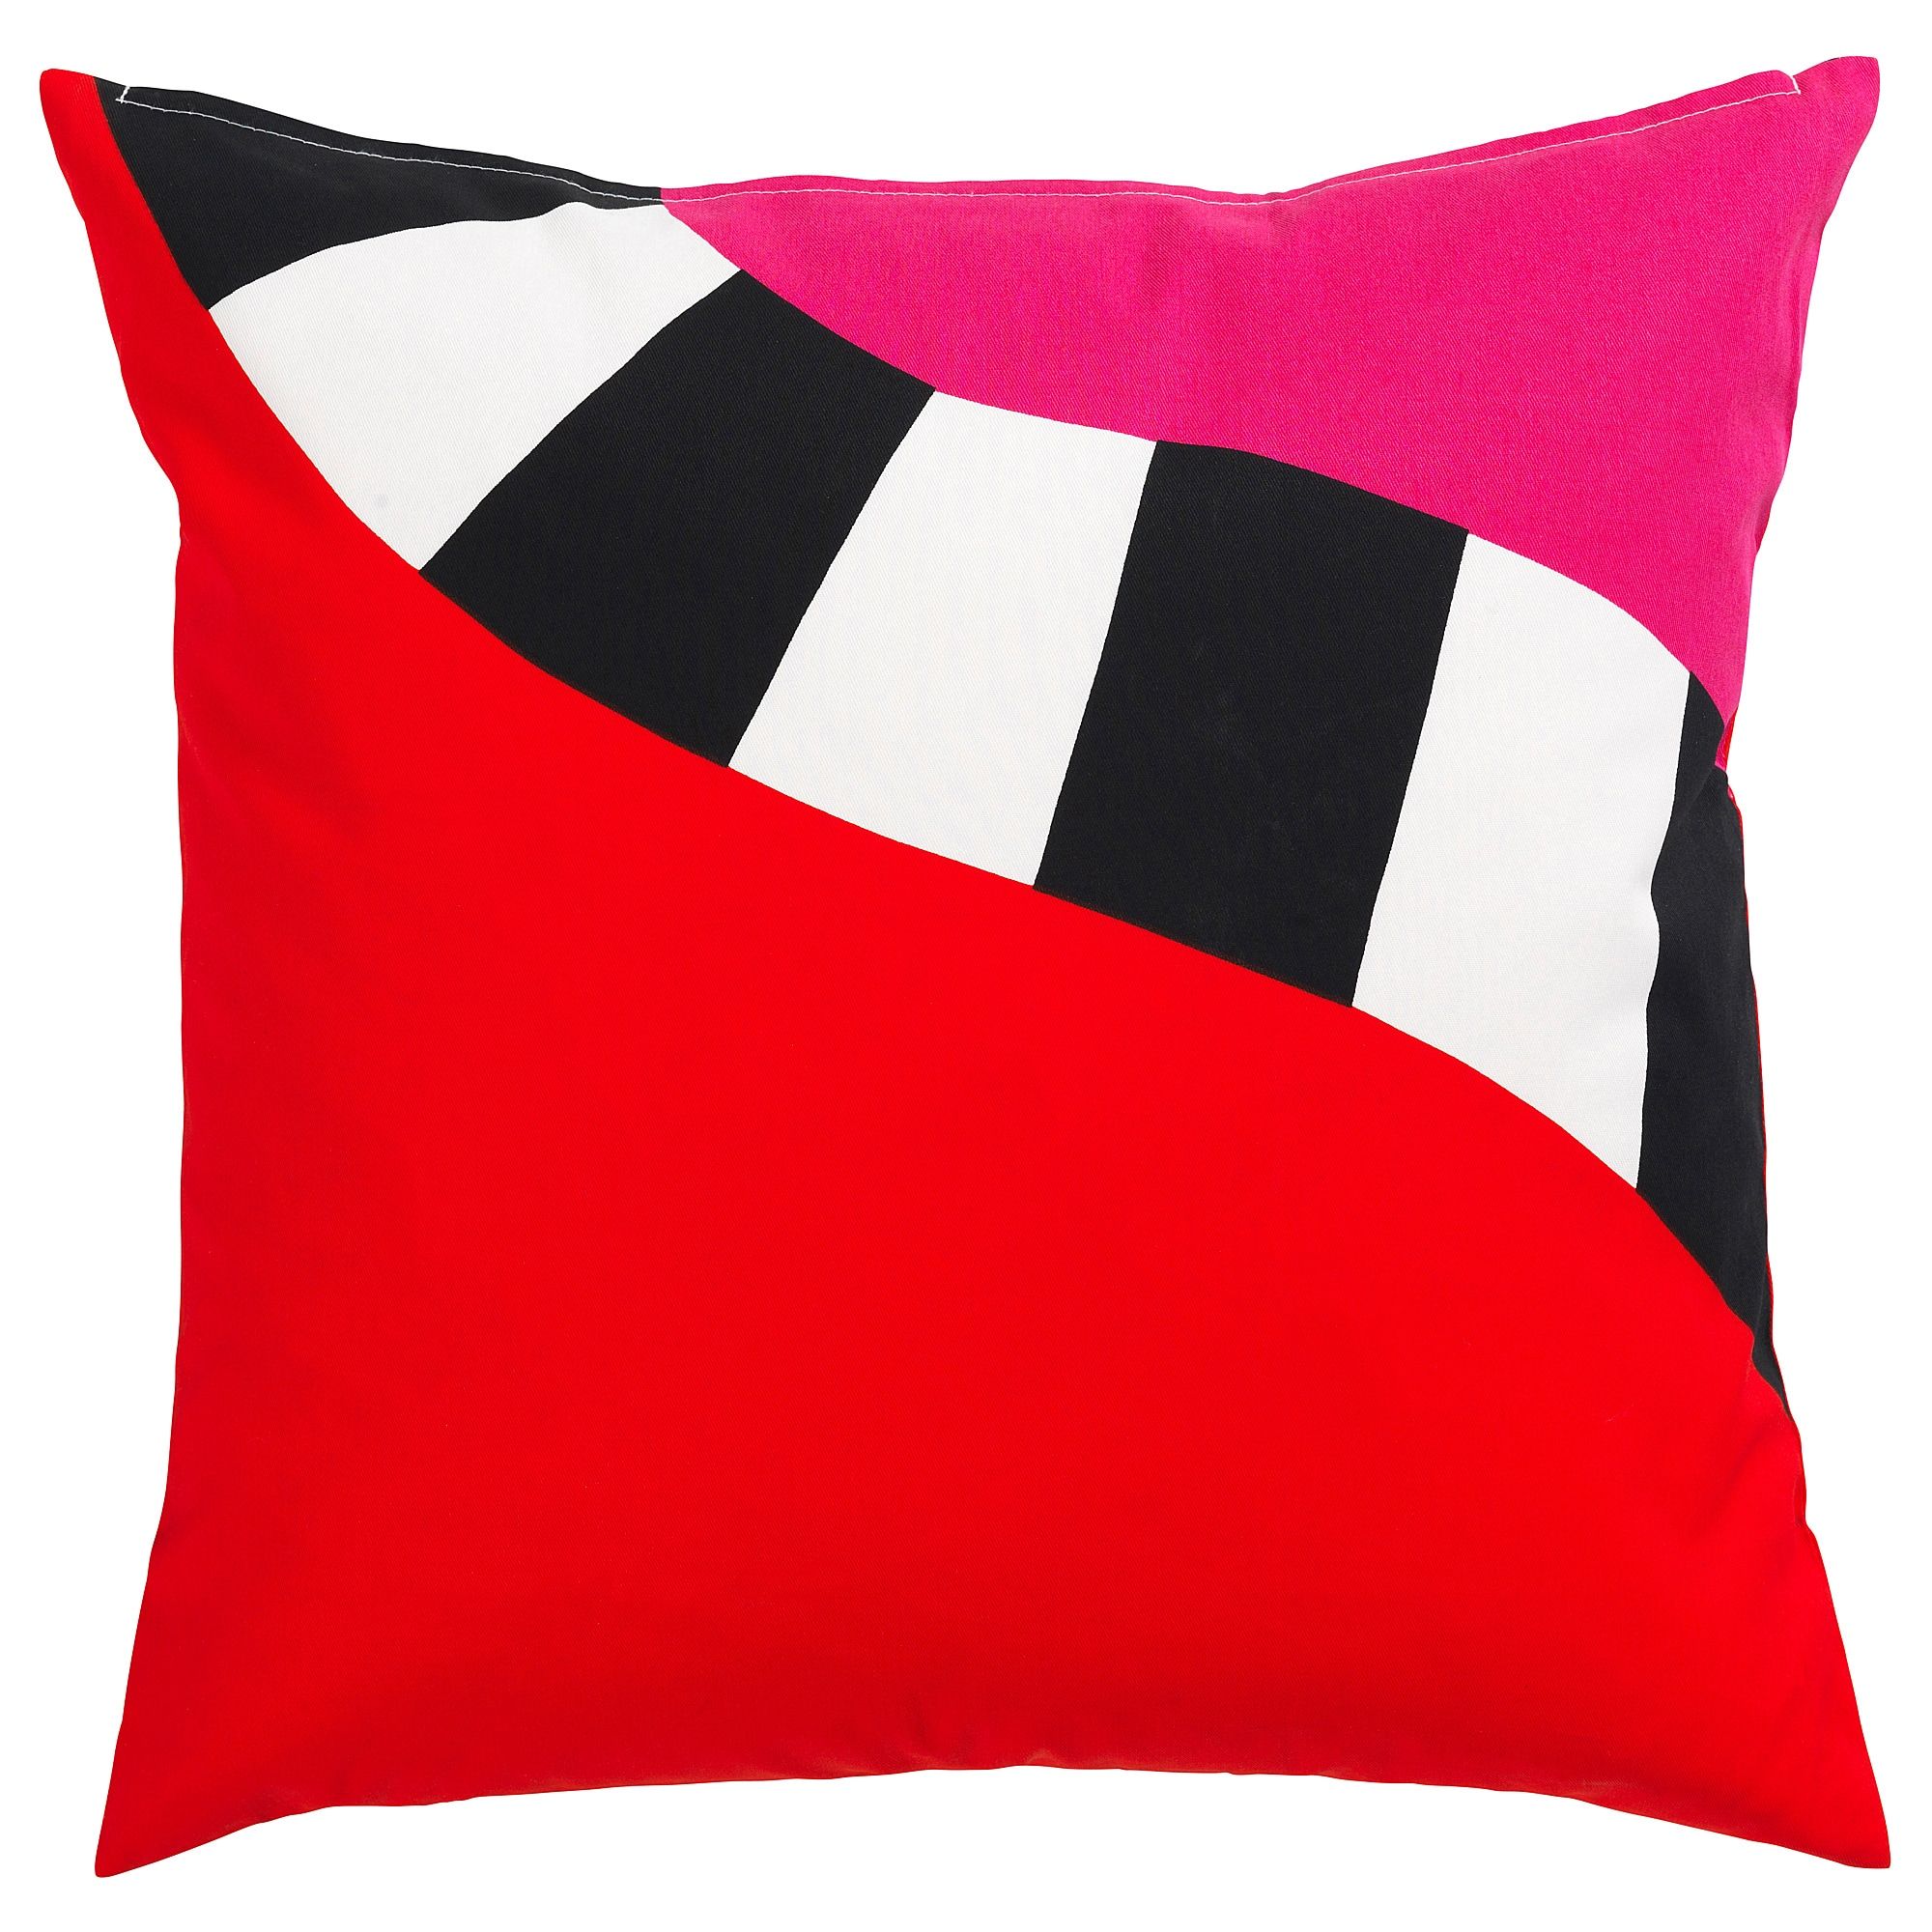 MOSAIKBLAD Cushion Cover, Red